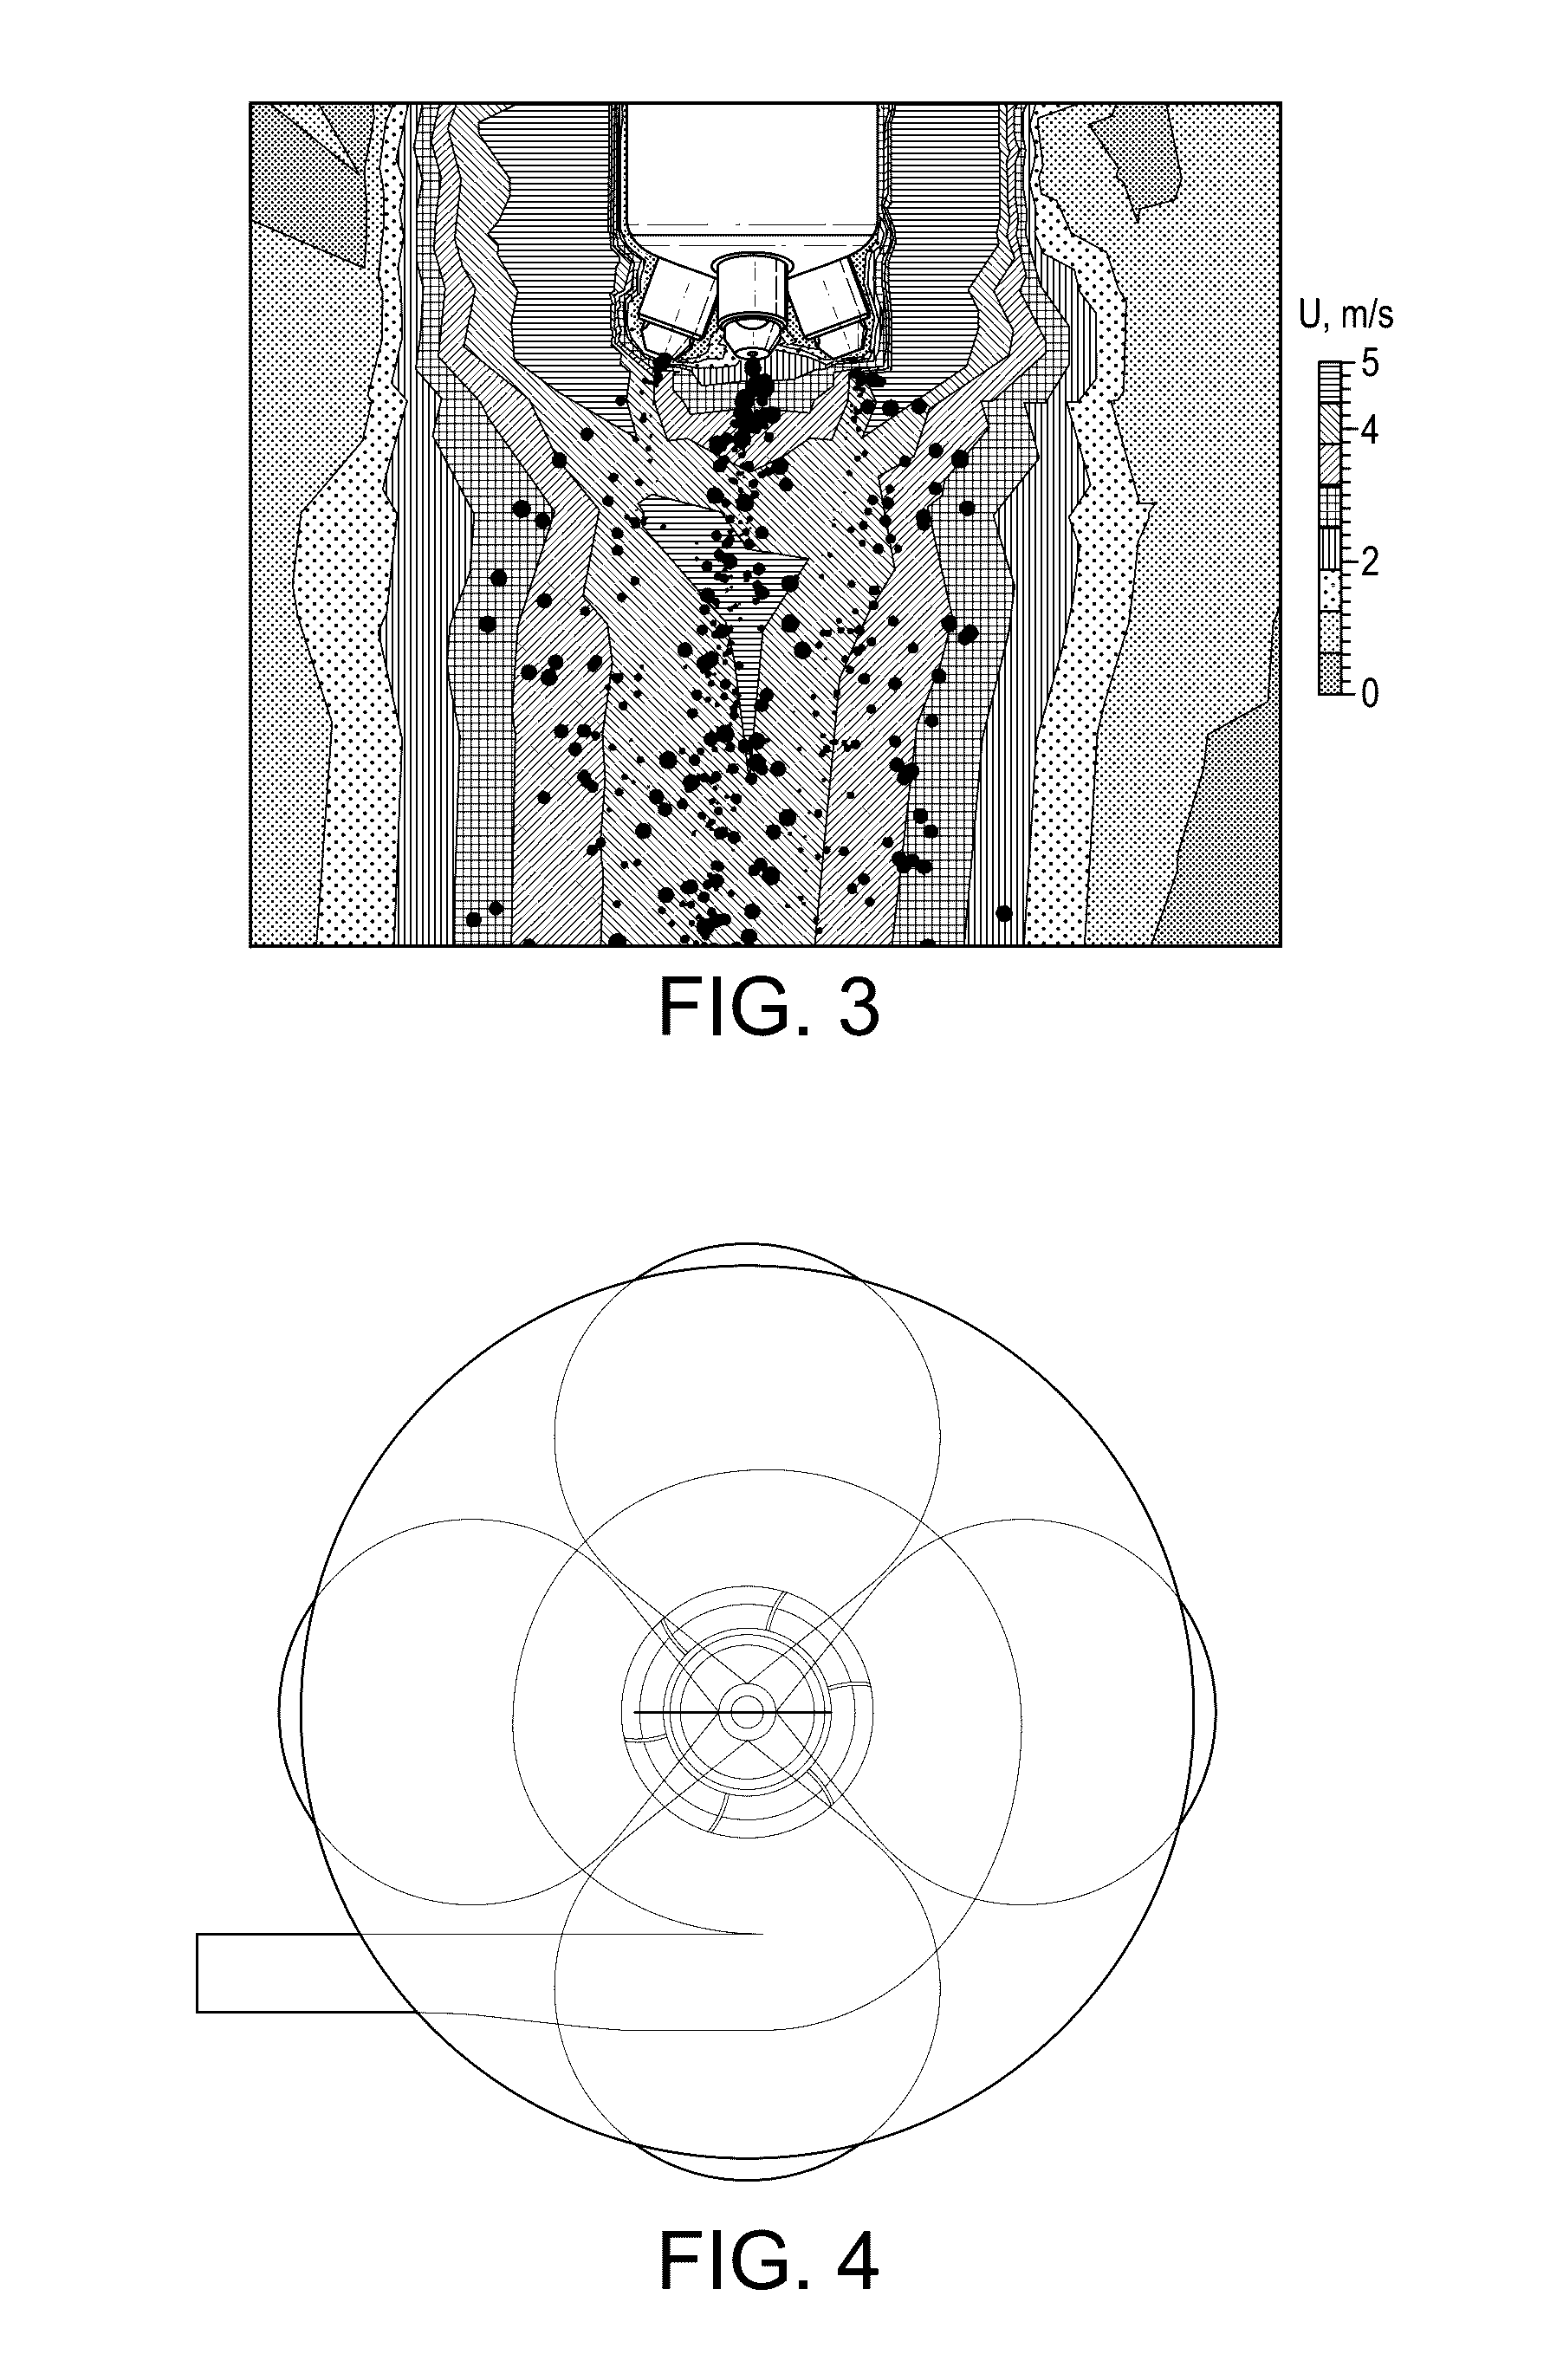 Multi-Nozzle Spray Dryer, Method for Scale-Up of Spray Dried Inhalation Powders, Multi-Nozzle Apparatus and Use of Multiple Nozzles in a Spray Dryer